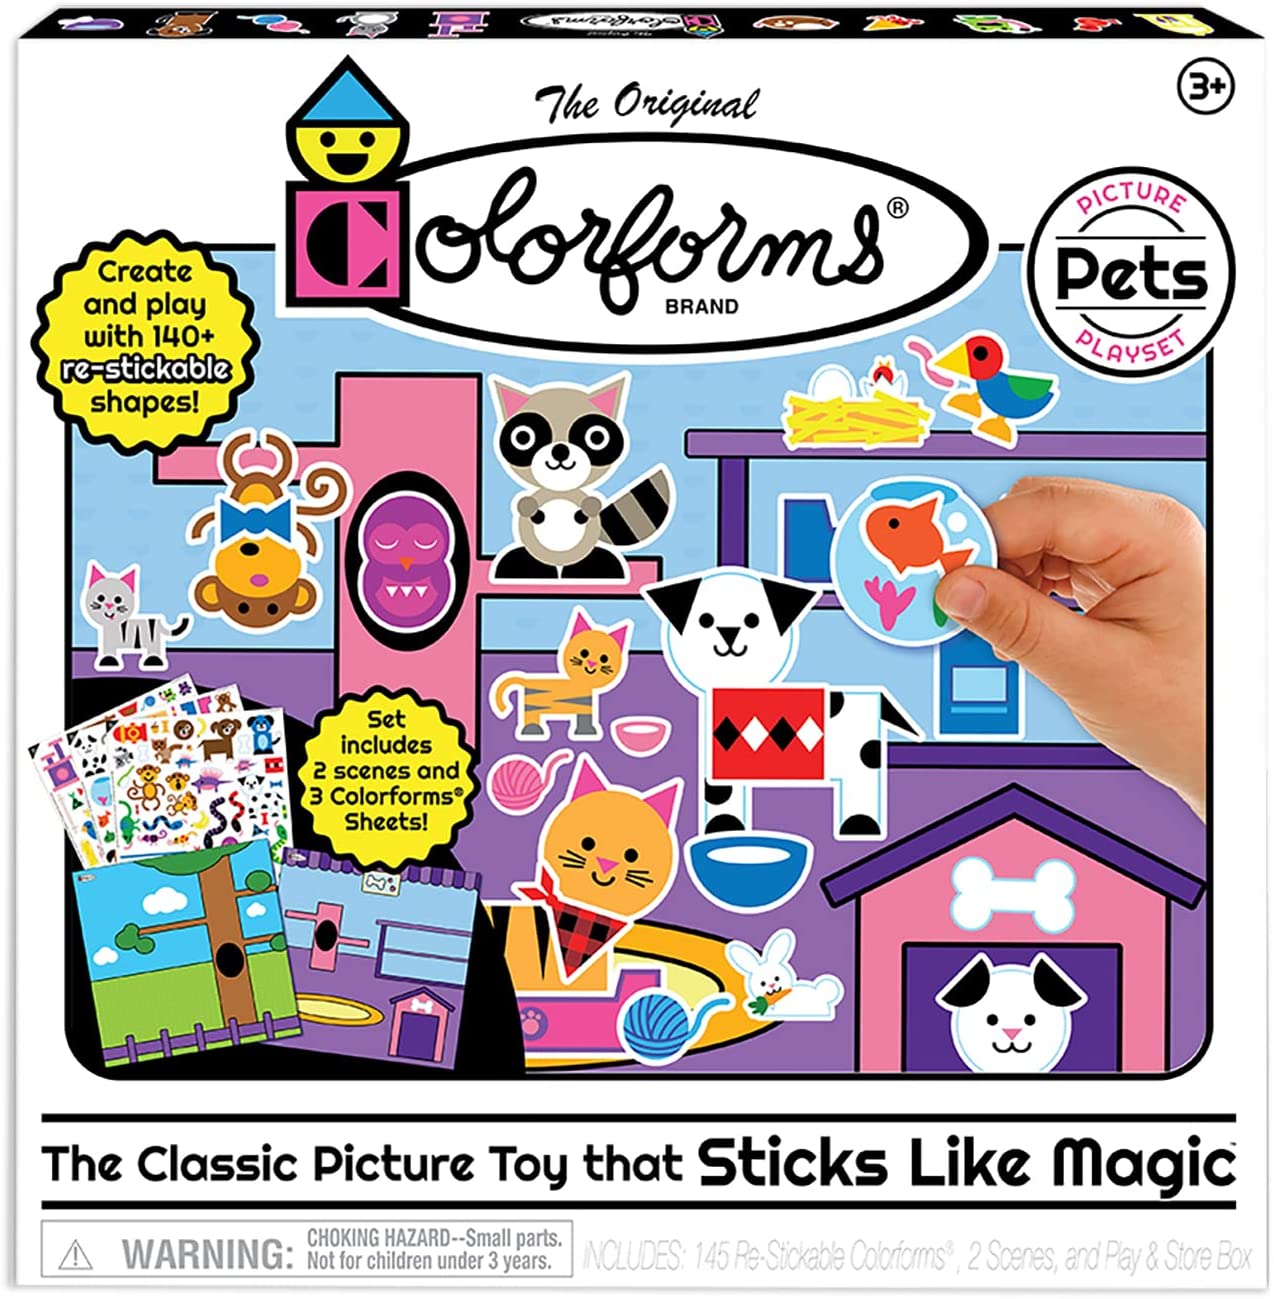 Arts & Crafts Tagged colorforms - West Side Kids Inc